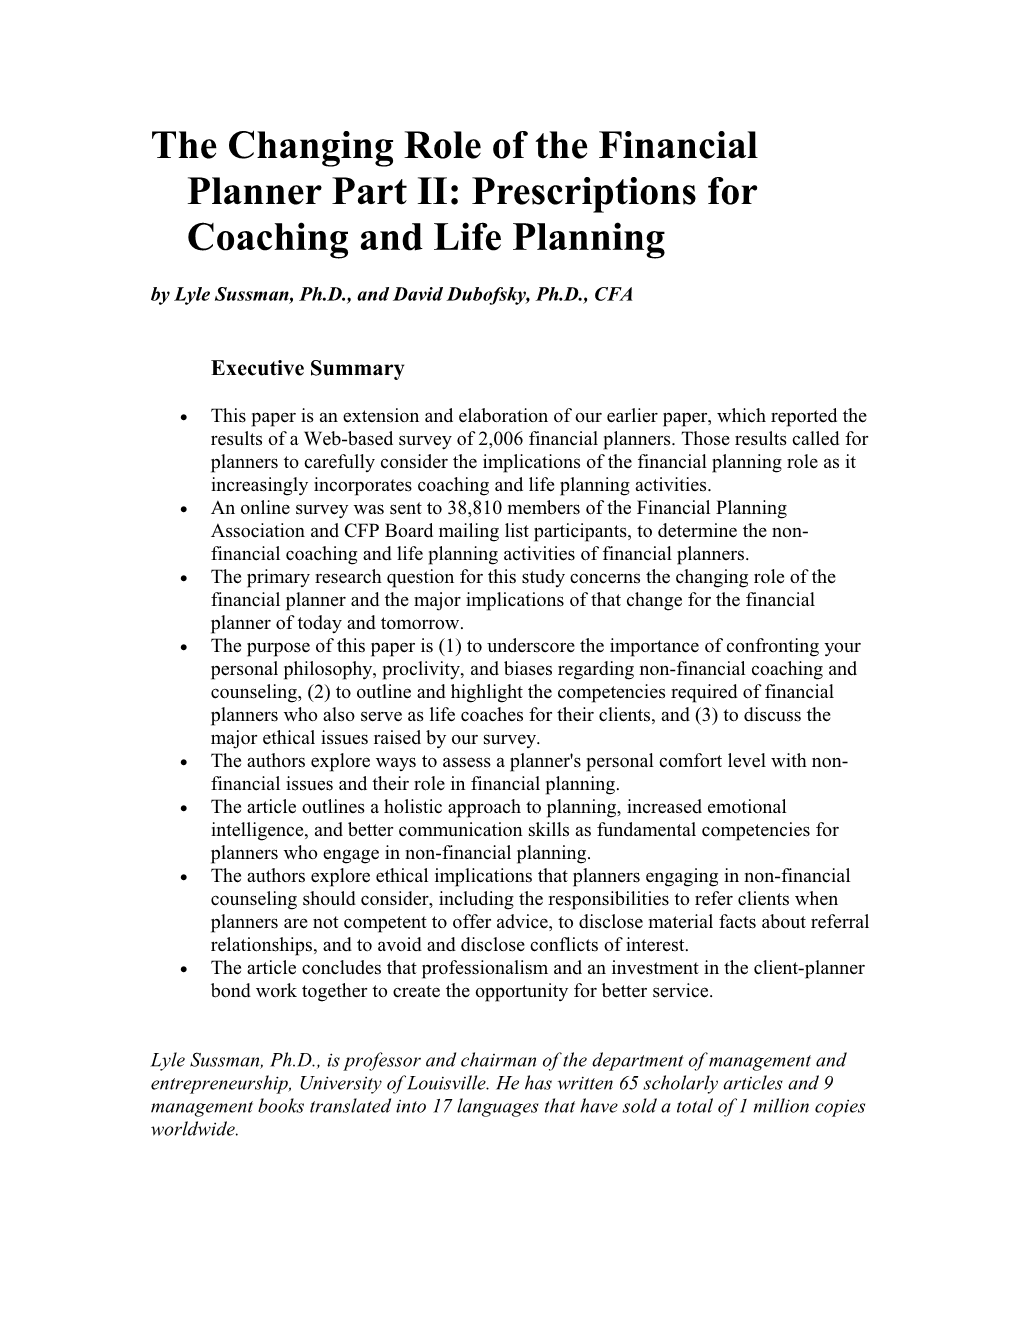 The Changing Role of the Financial Planner Part II: Prescriptions for Coaching and Life Planning